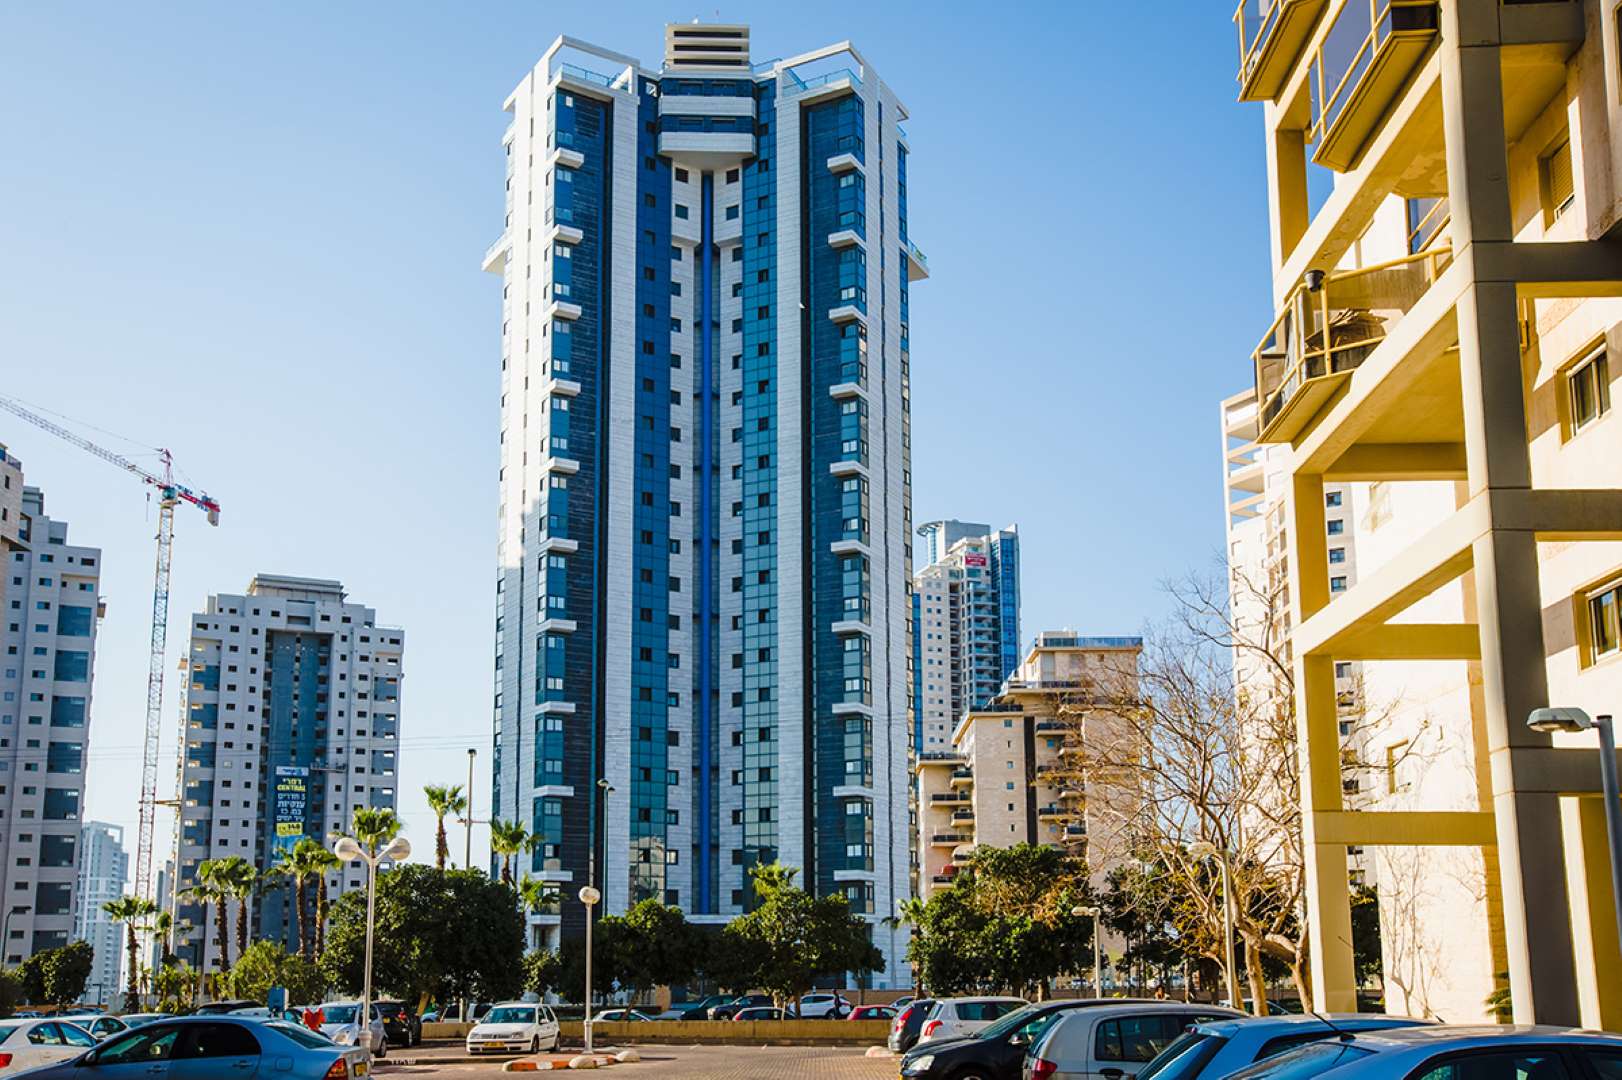 Photo of a building from the SEE UNIK project in Netanya